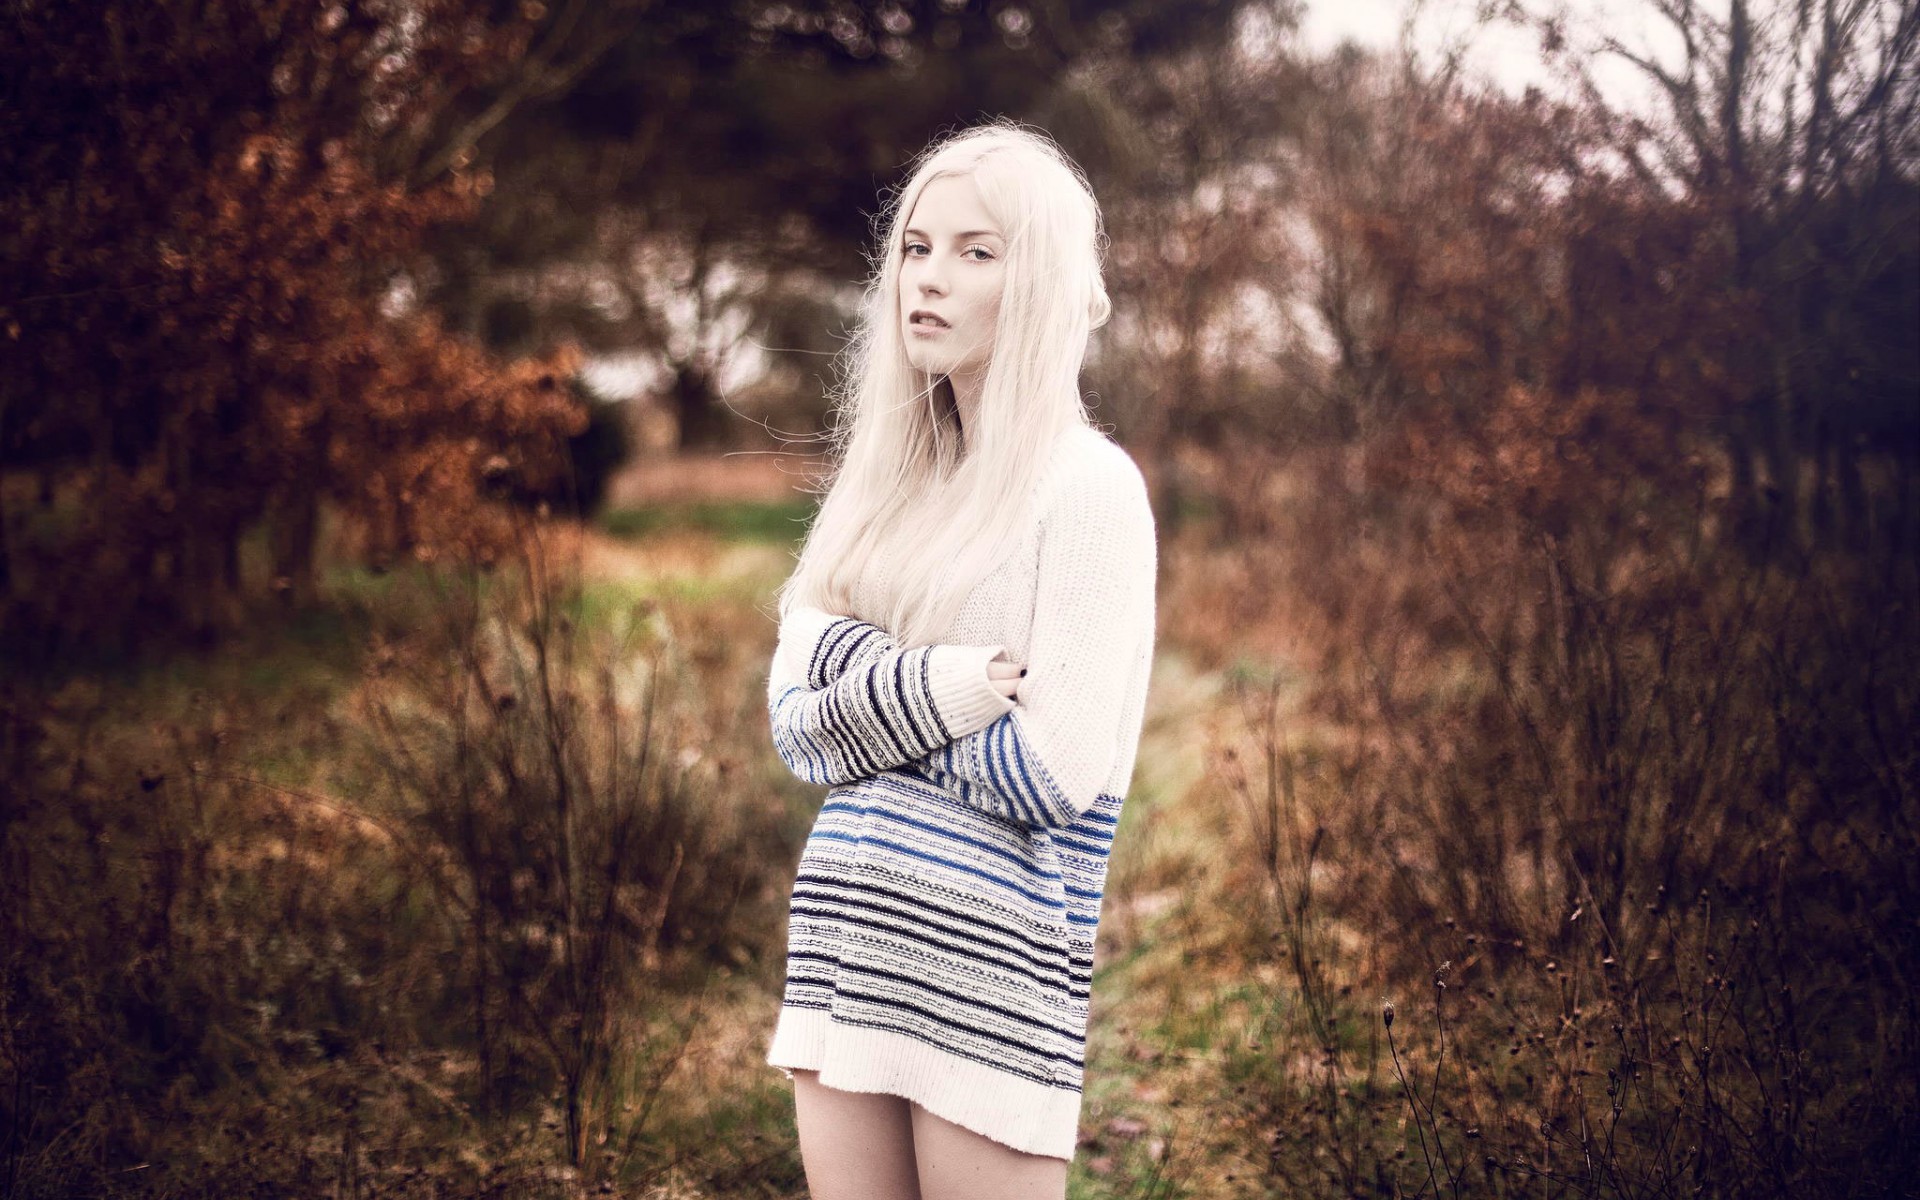 Women Outdoors Arms Crossed Sweater Dress Platinum Blonde Arms On Chest 1920x1200